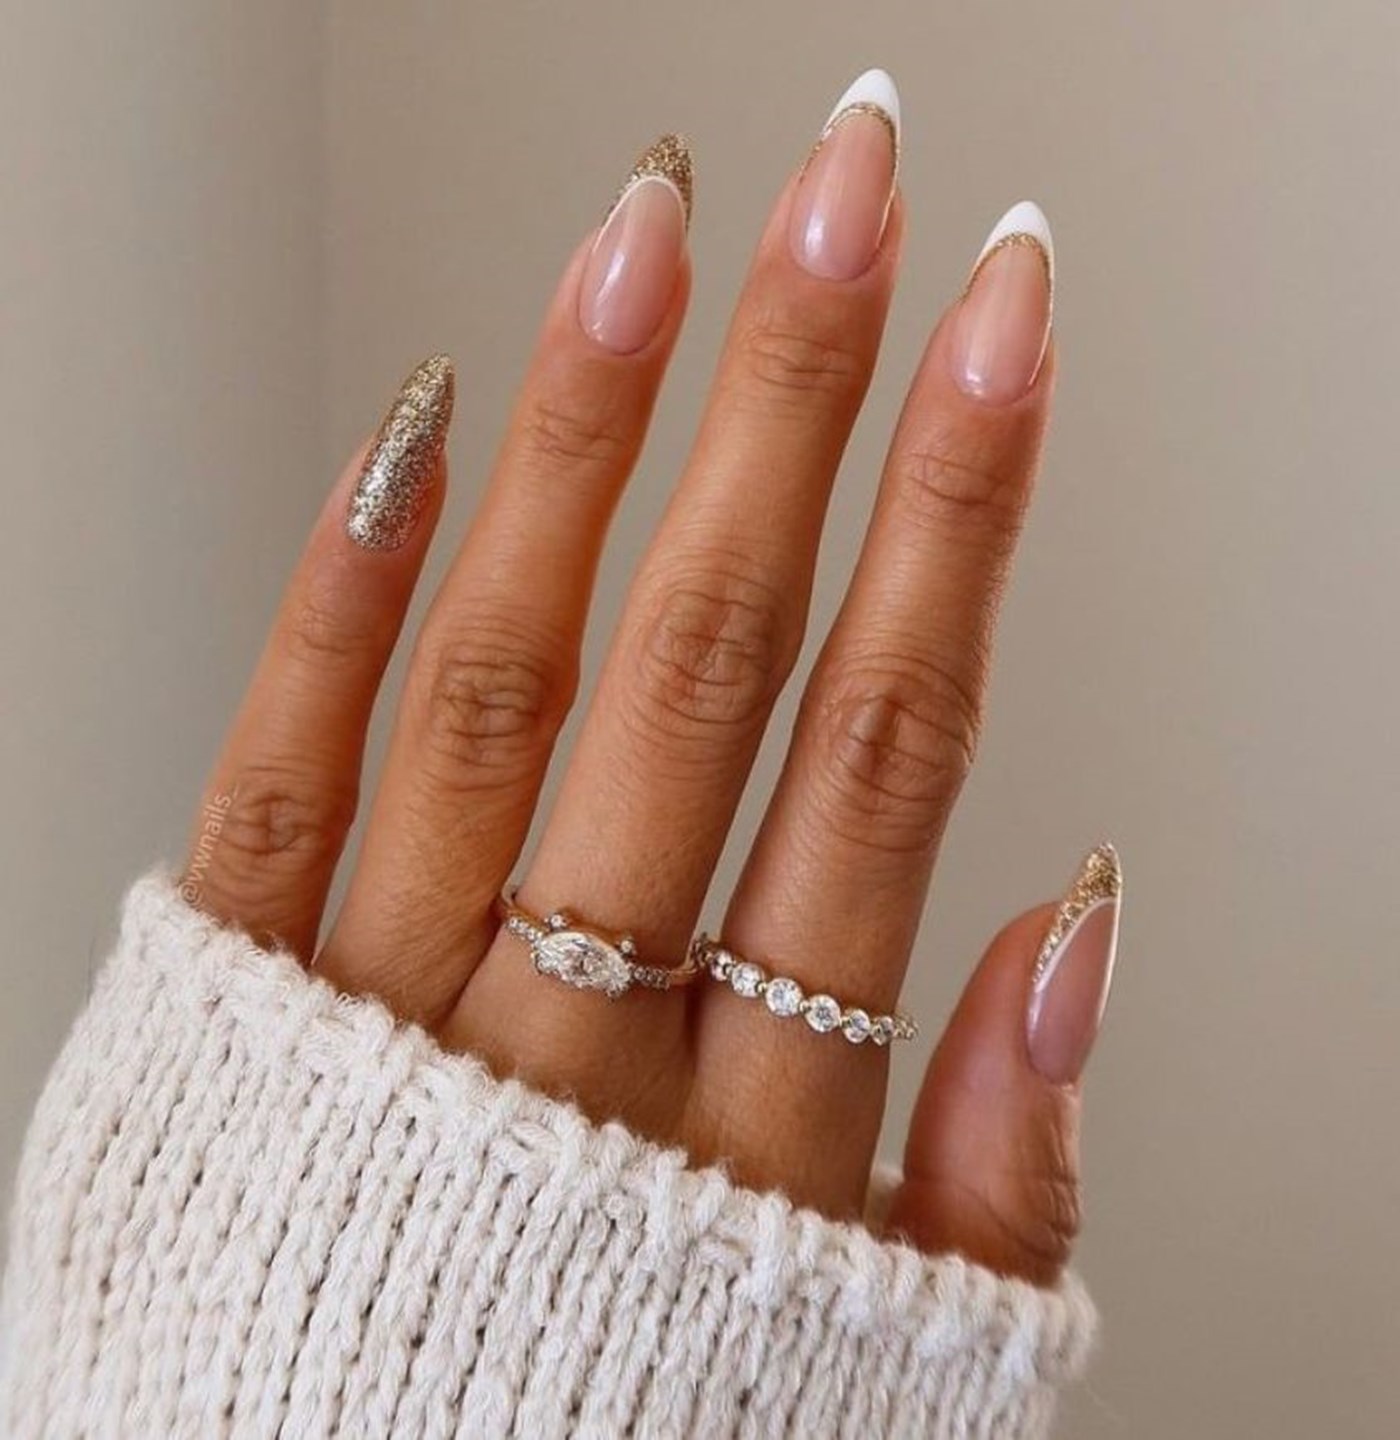 Nail Salons Sydney: Where to Go for the Perfect Holiday Manicure | Sitchu  Sydney